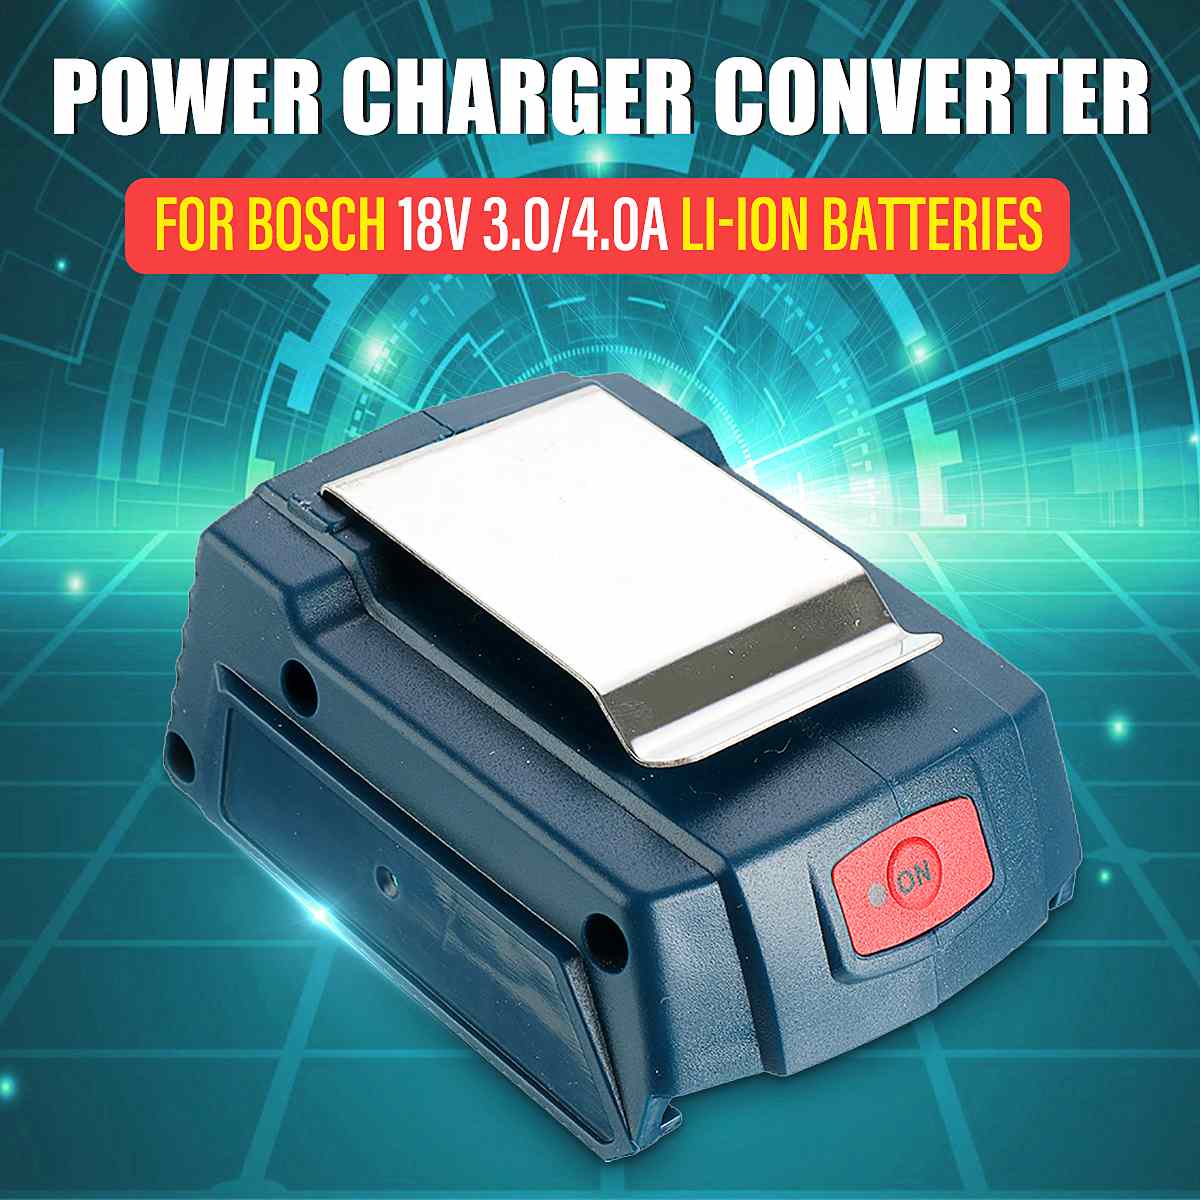 USB Power Phone Charger Adapter Converter for Bosch 18V 3.0/4.0A Li-ion Battery to Phone Charging Charger Emergency Power Supply